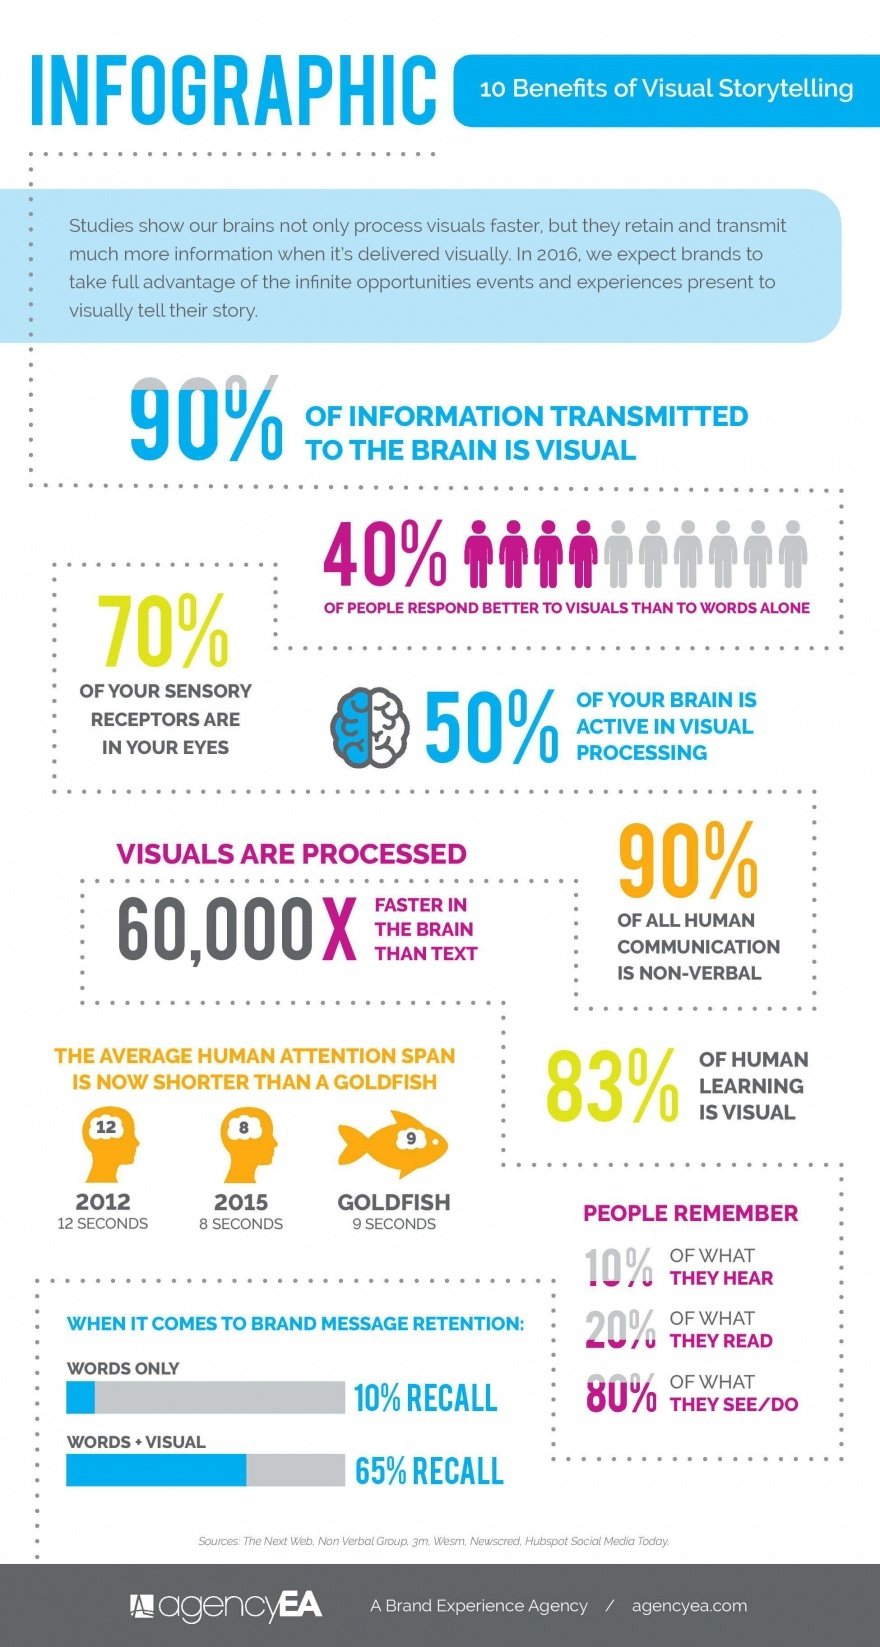 10-benefits-of-visual-storytelling_infographic_1